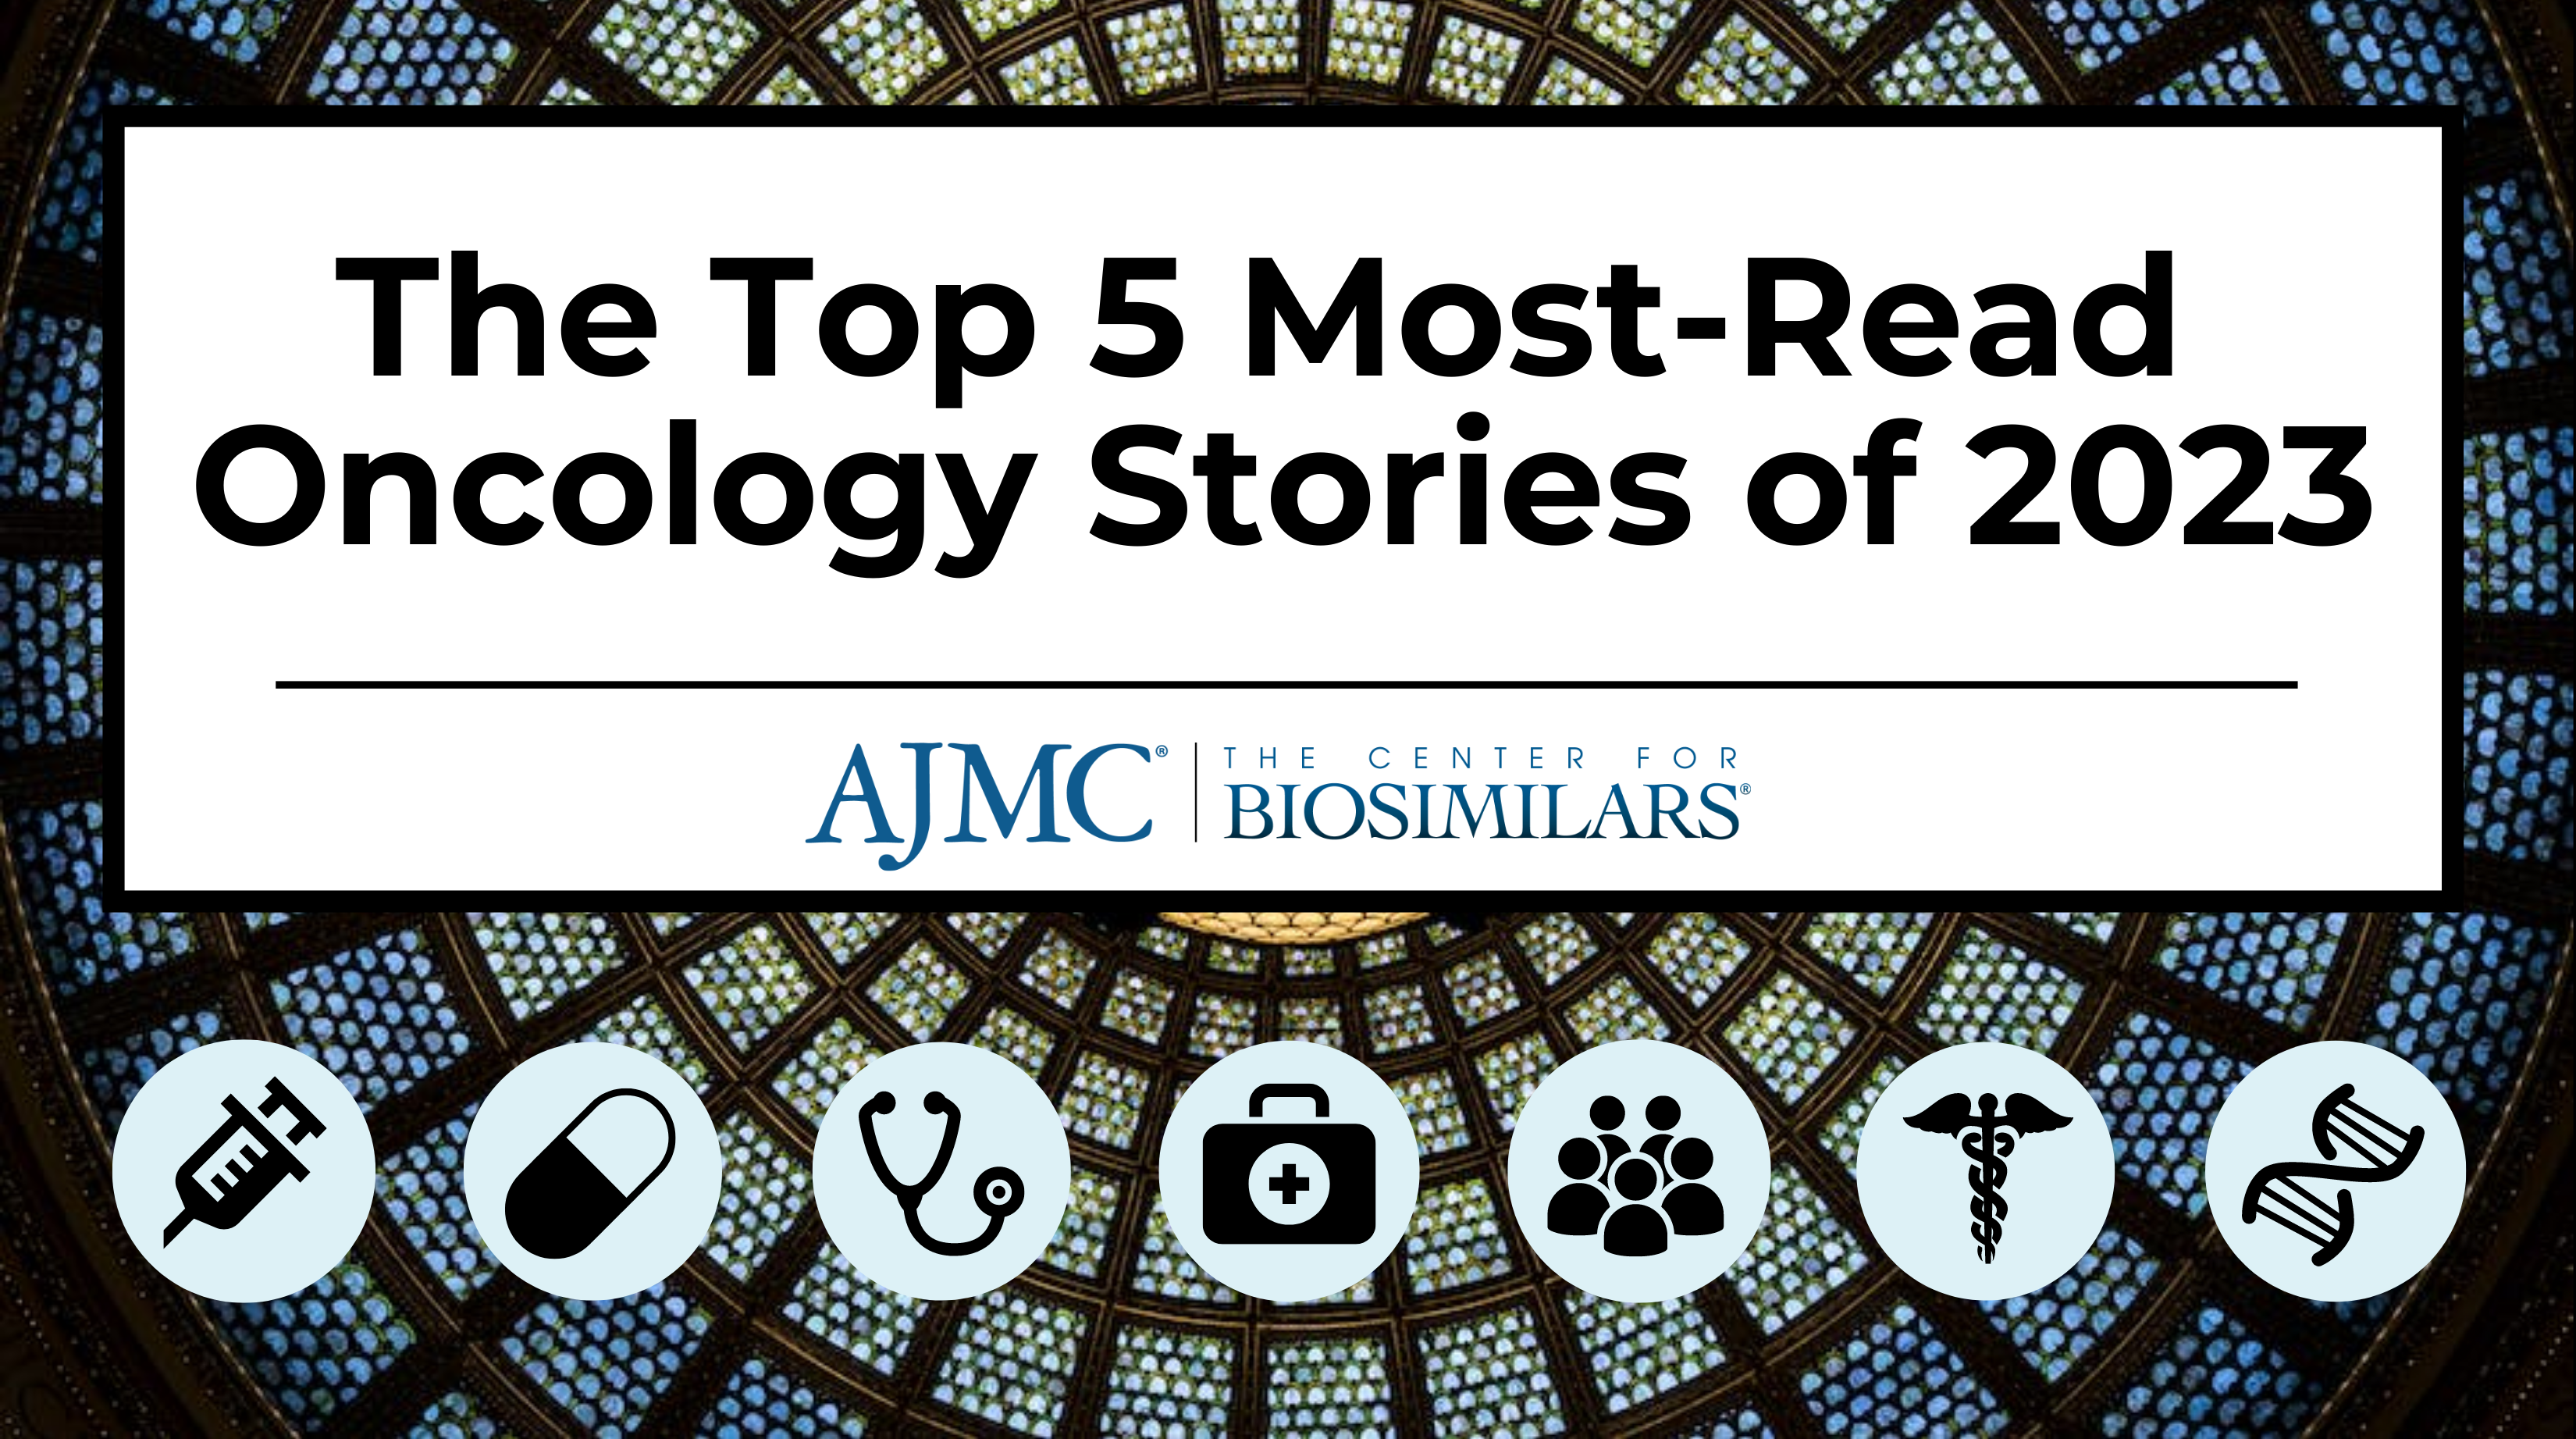 The Top 5 Most-Read Oncology Stories of 2023